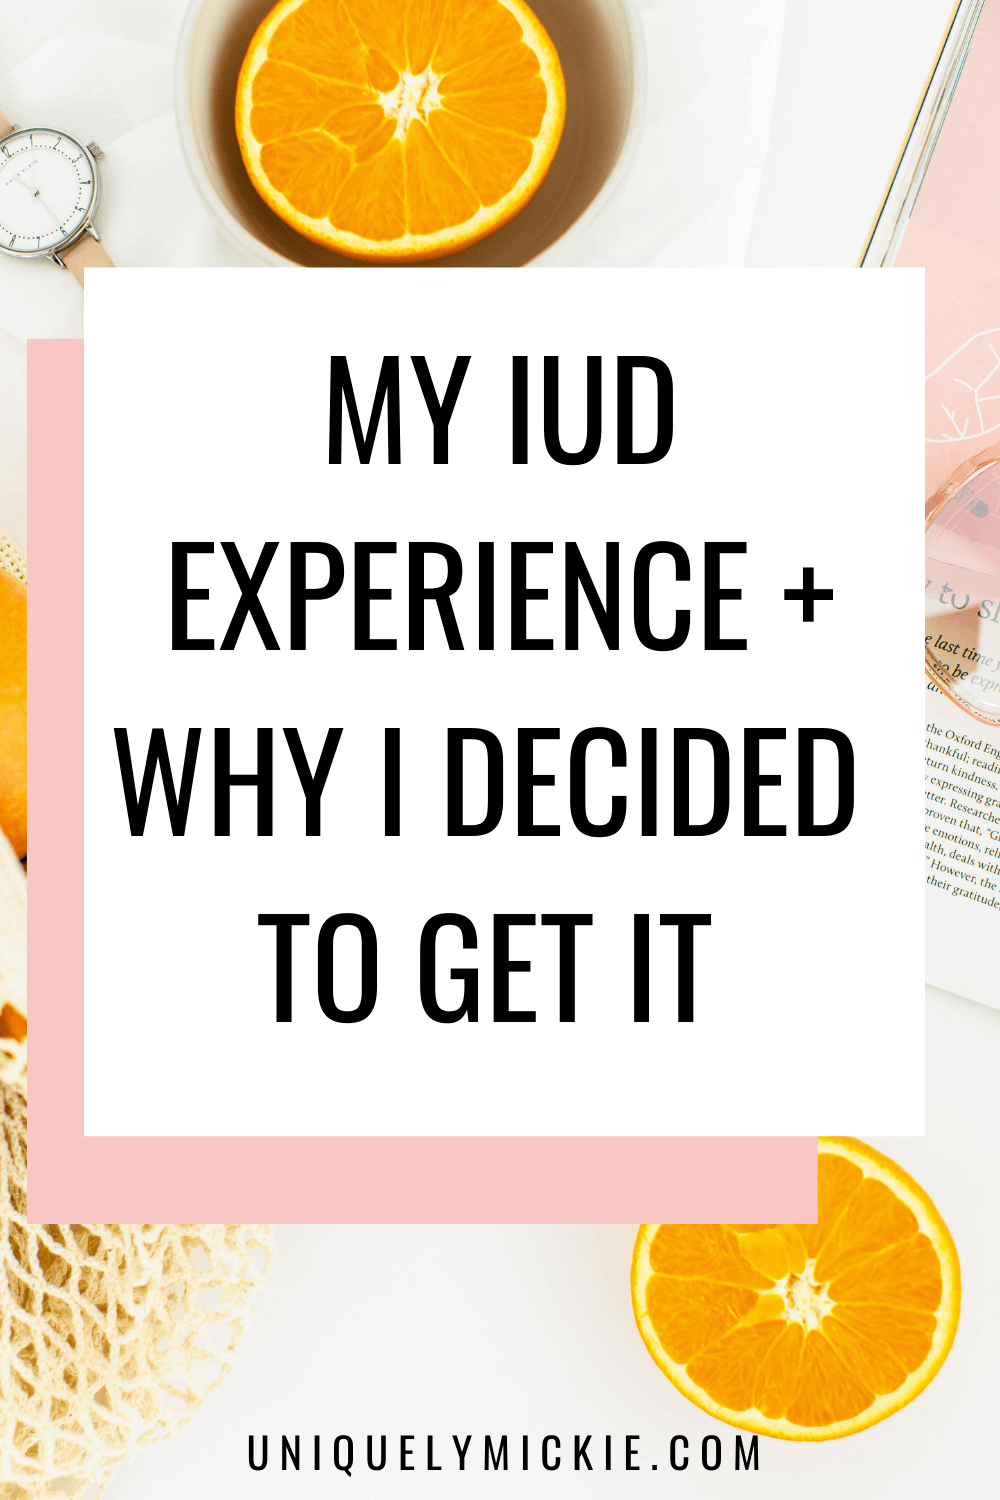 My IUD Experience + Why I Decided to Get It